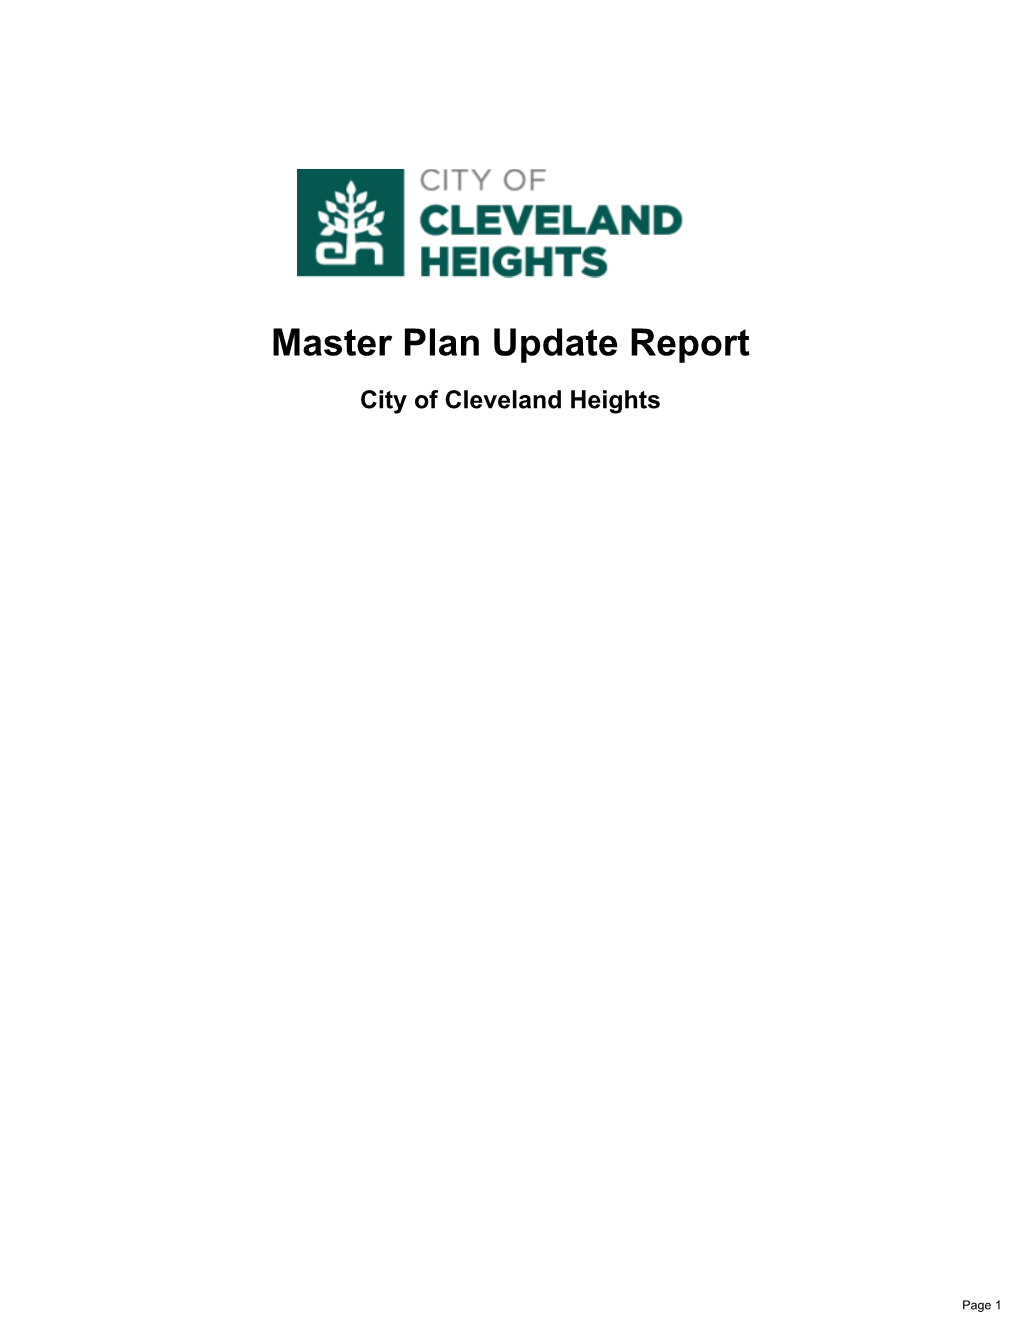 This Report Covers Updates to Cleveland